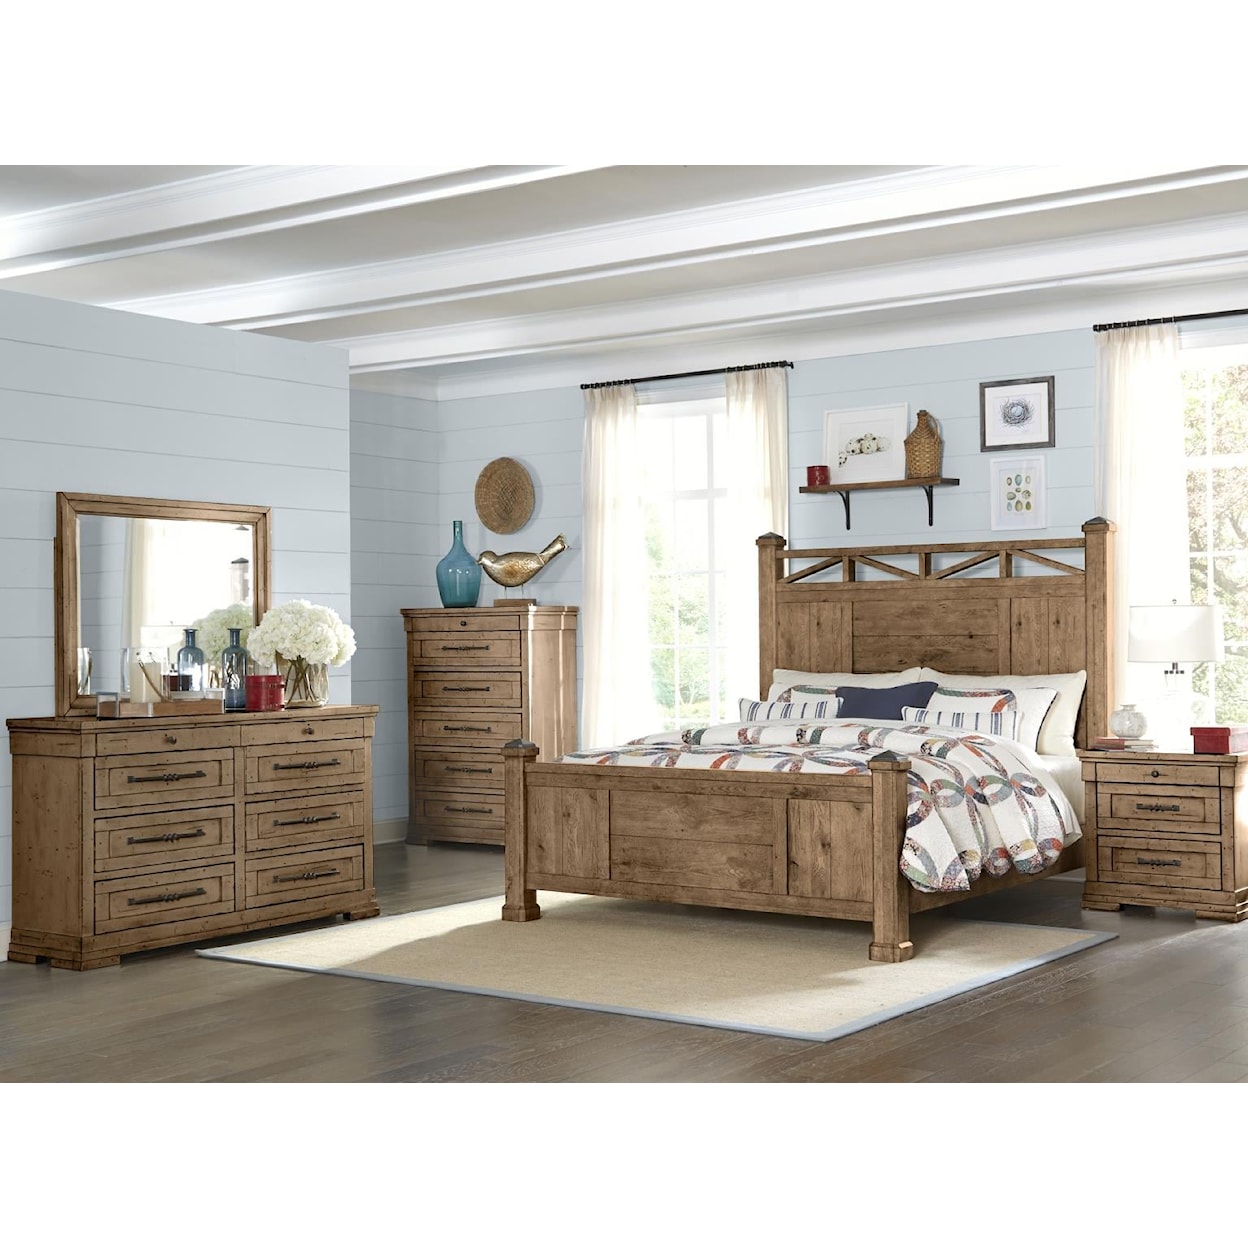 Trisha Yearwood Home Collection by Legacy Classic Coming Home 5-Piece Bedroom Set